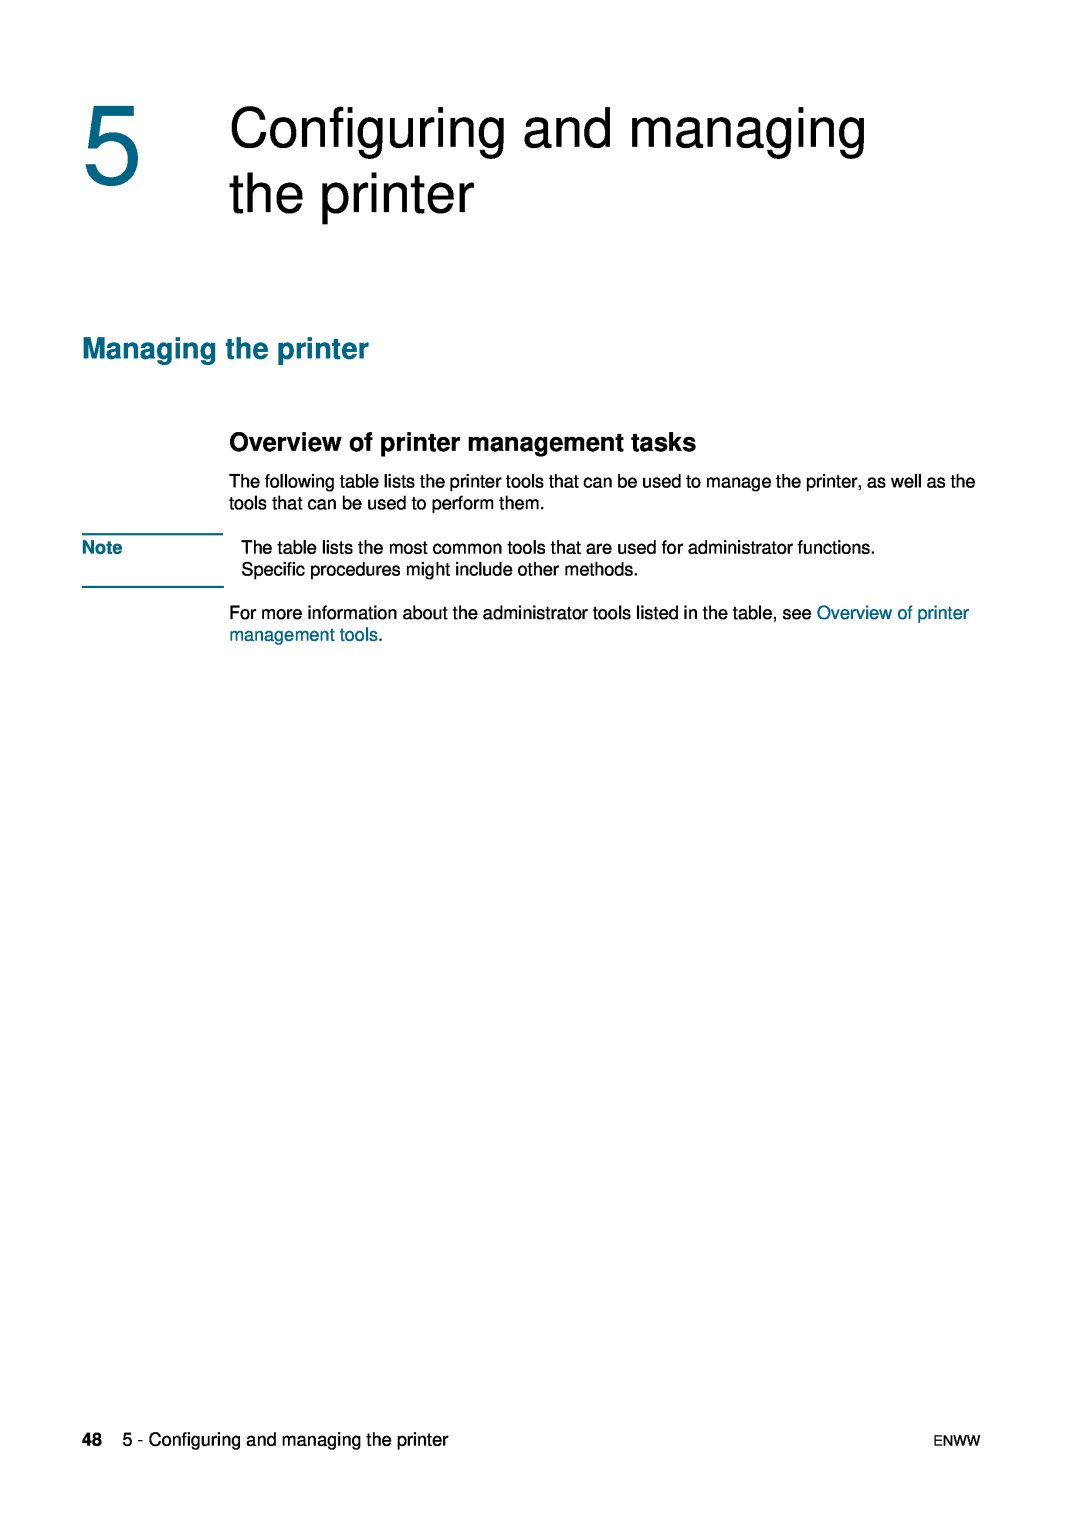 HP 1200 manual Configuring and managing, Managing the printer, Overview of printer management tasks 